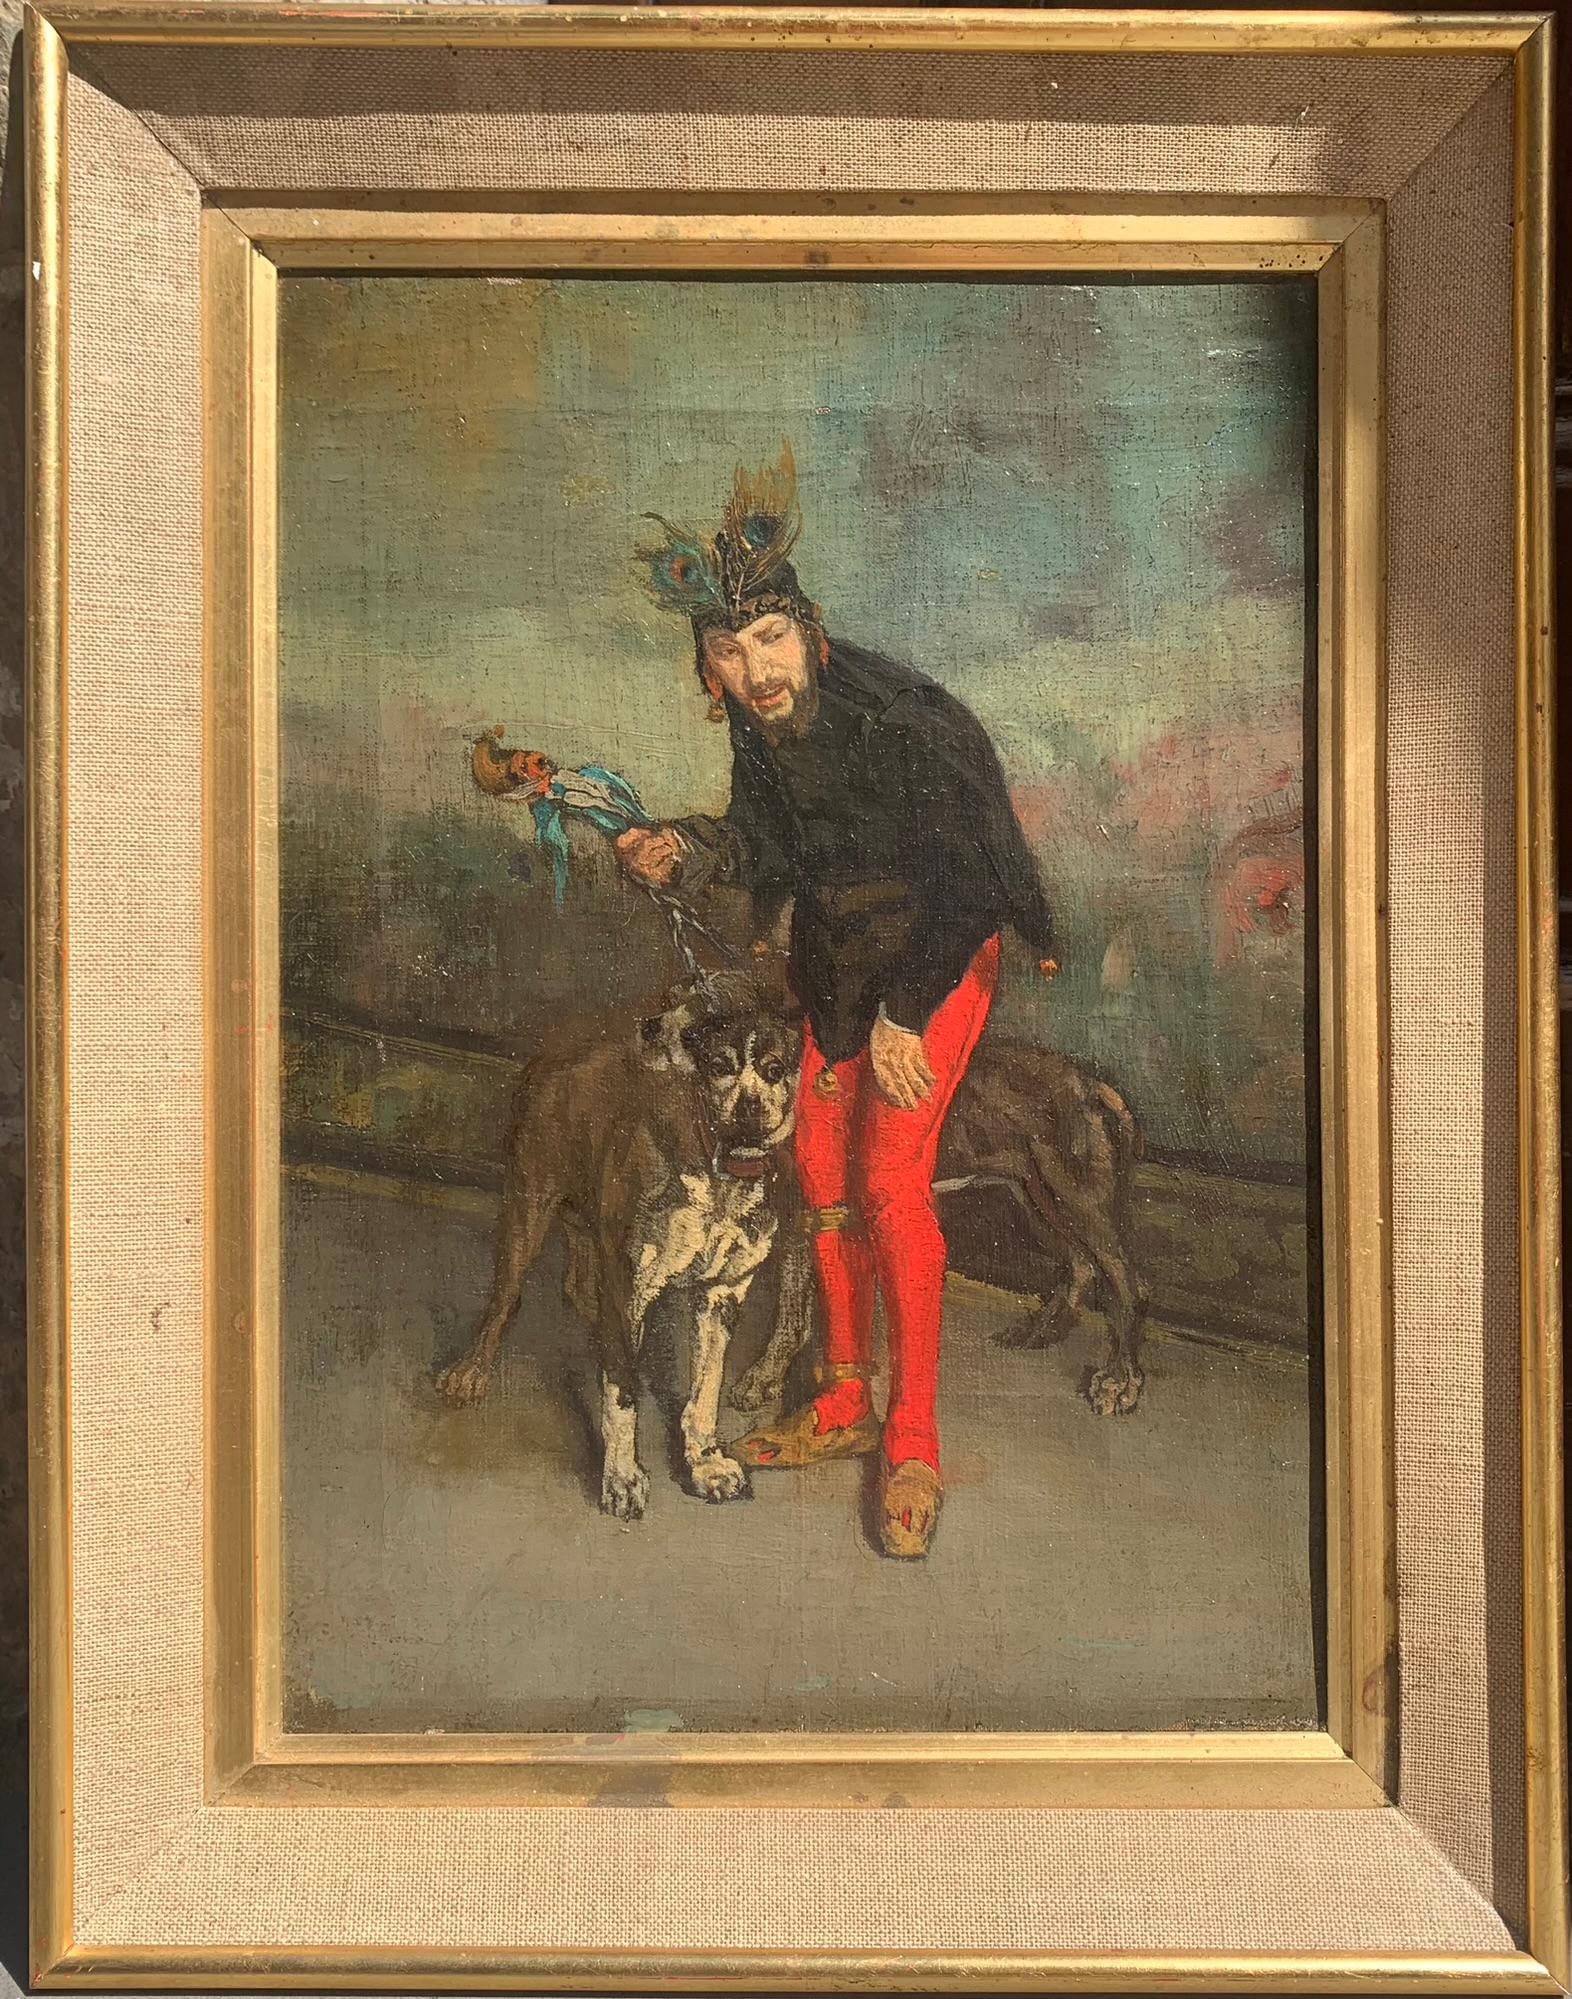 A court jester with dogs. Late 19th century. - Painting by Unknown